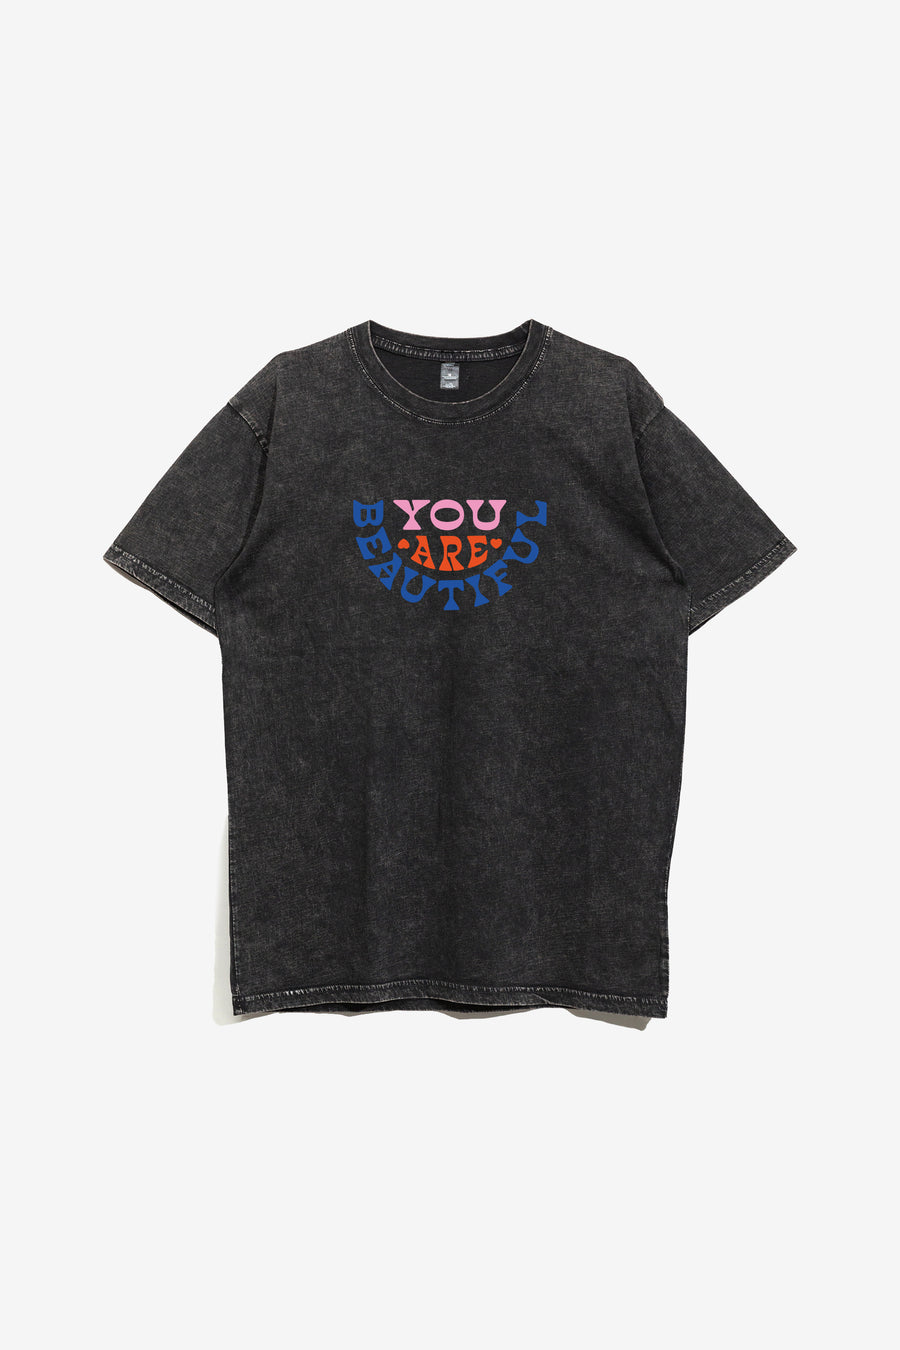 You Are Beautiful Mineral Washed Youth Tee